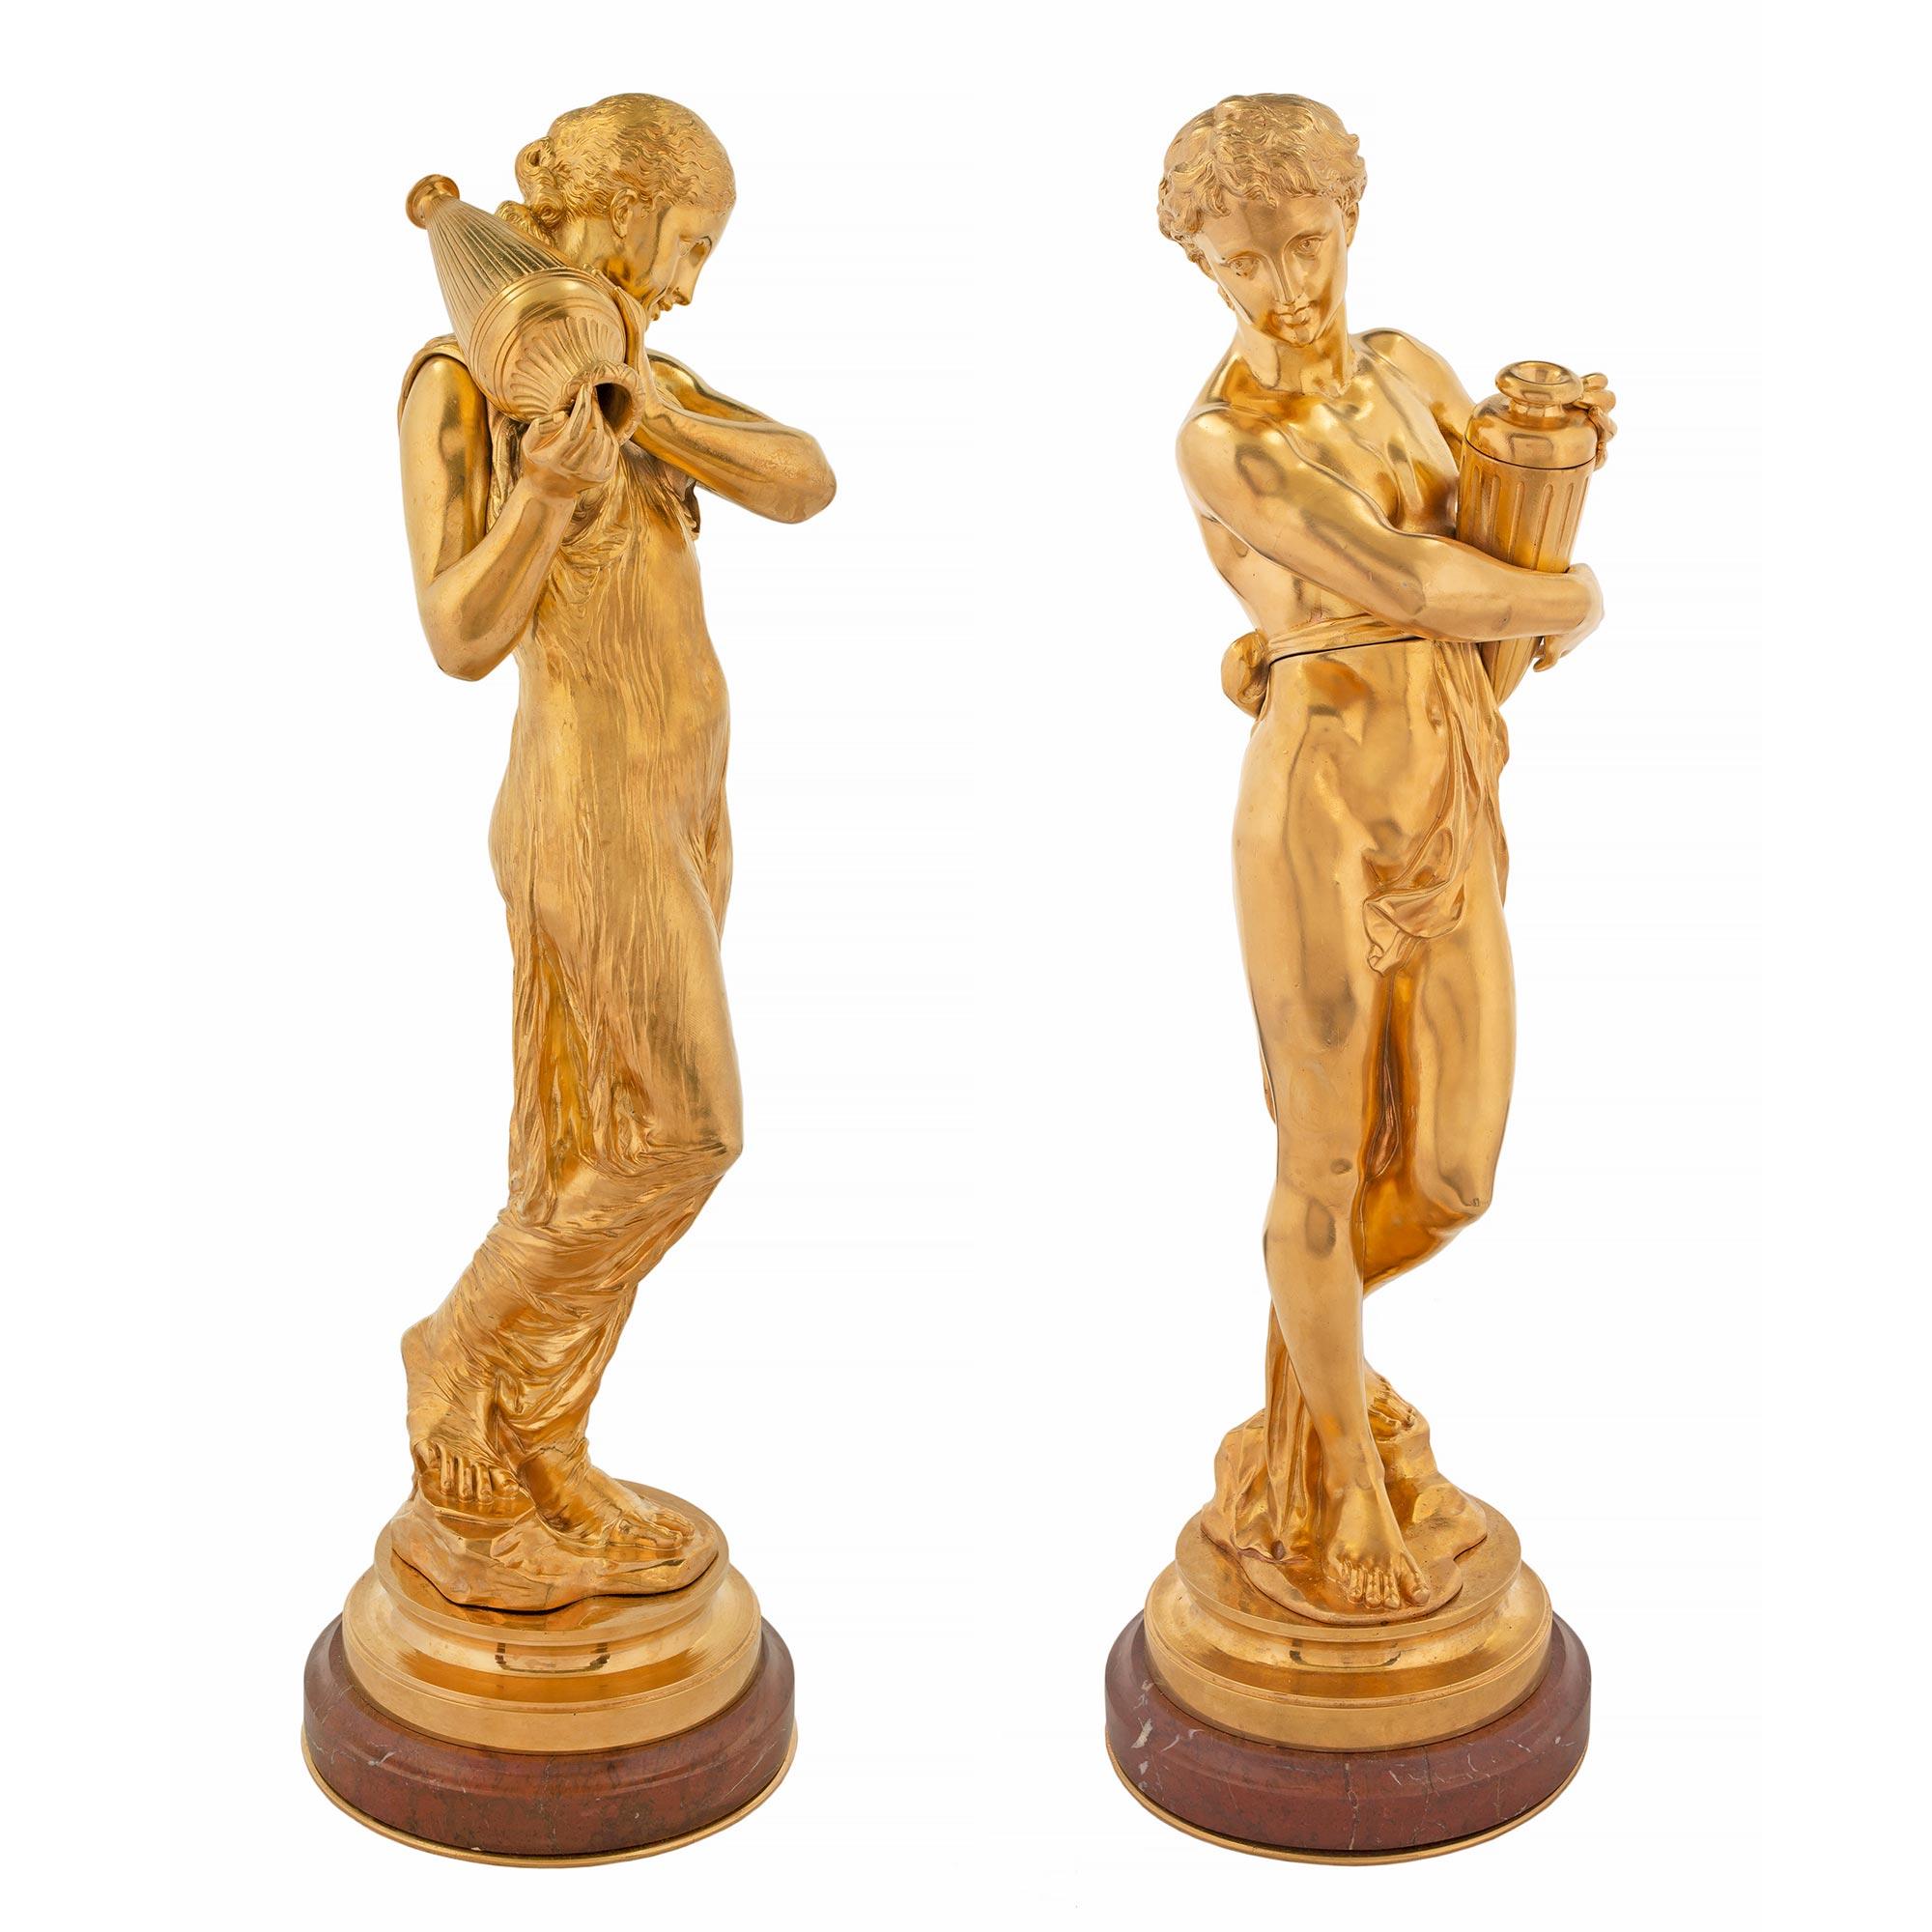 A very handsome and high quality pair of French Louis XVI st. ormolu and Rouge Griotte marble statues. Each is raised by an ormolu bottom plate below the mottled edge circular Rouge Griotte marble base. One figure is of a young maiden dressed in